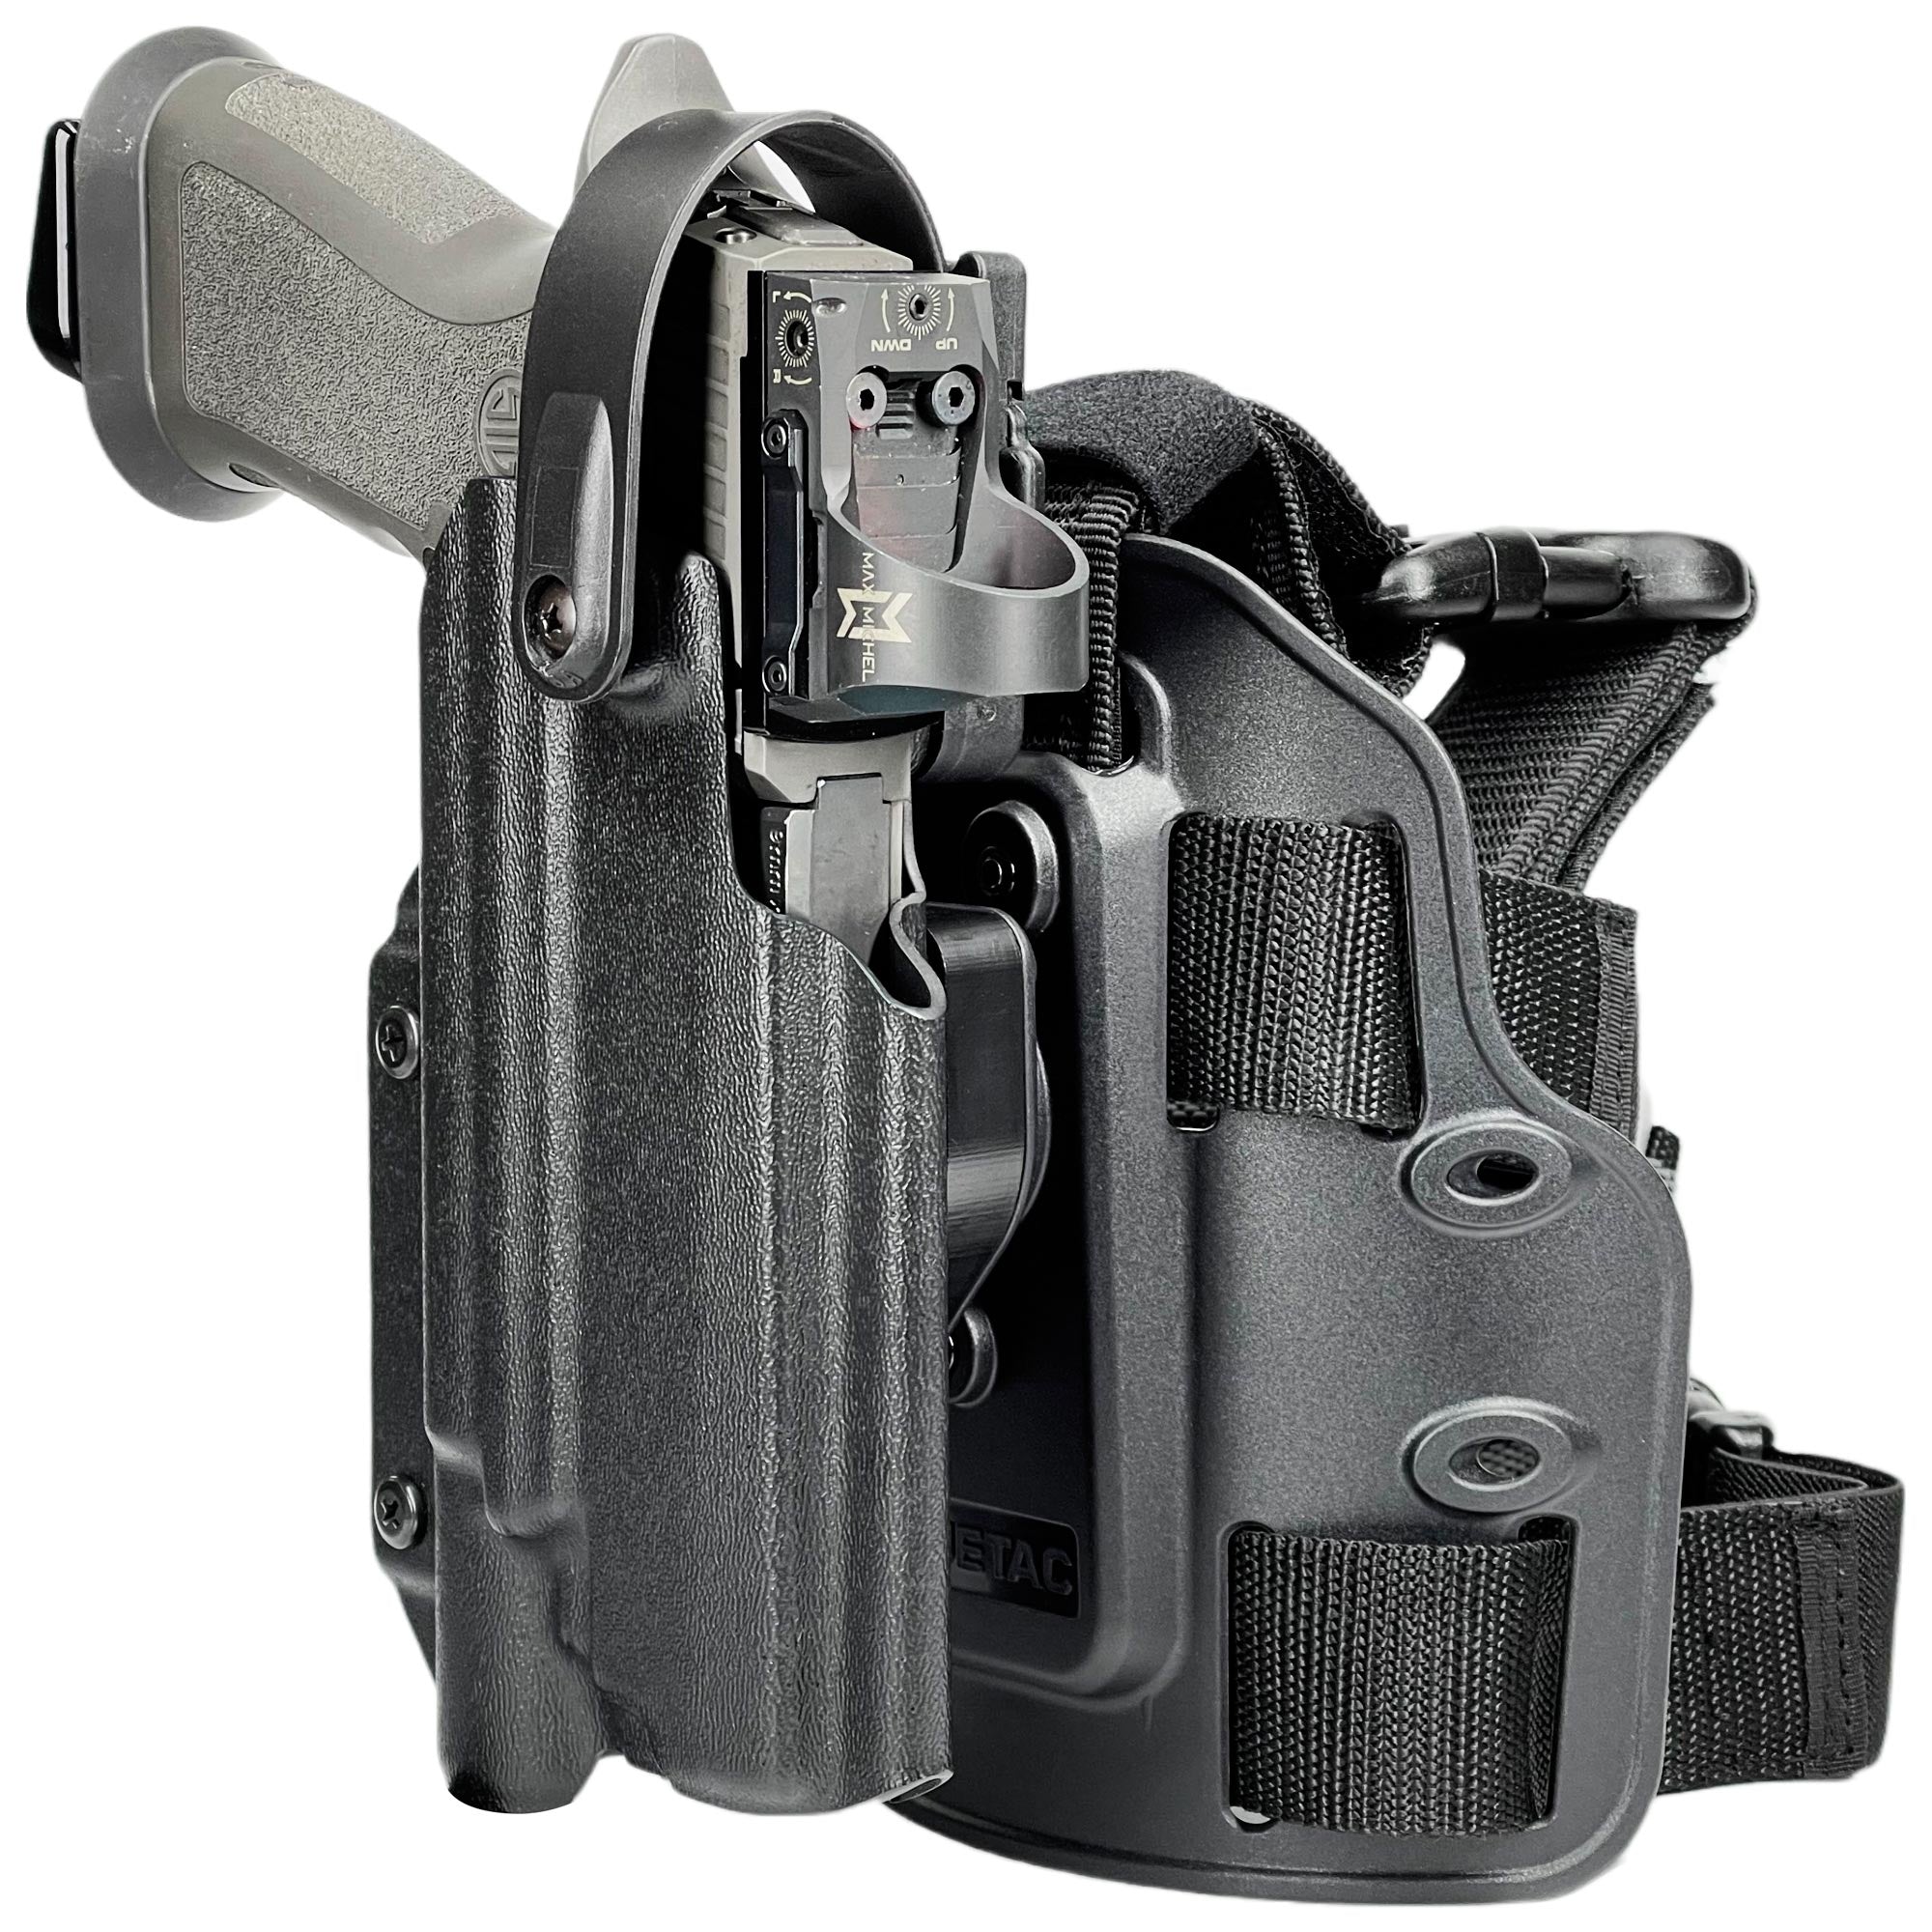 Duty Holster Hunting Gun Holsters for GLOCK for sale